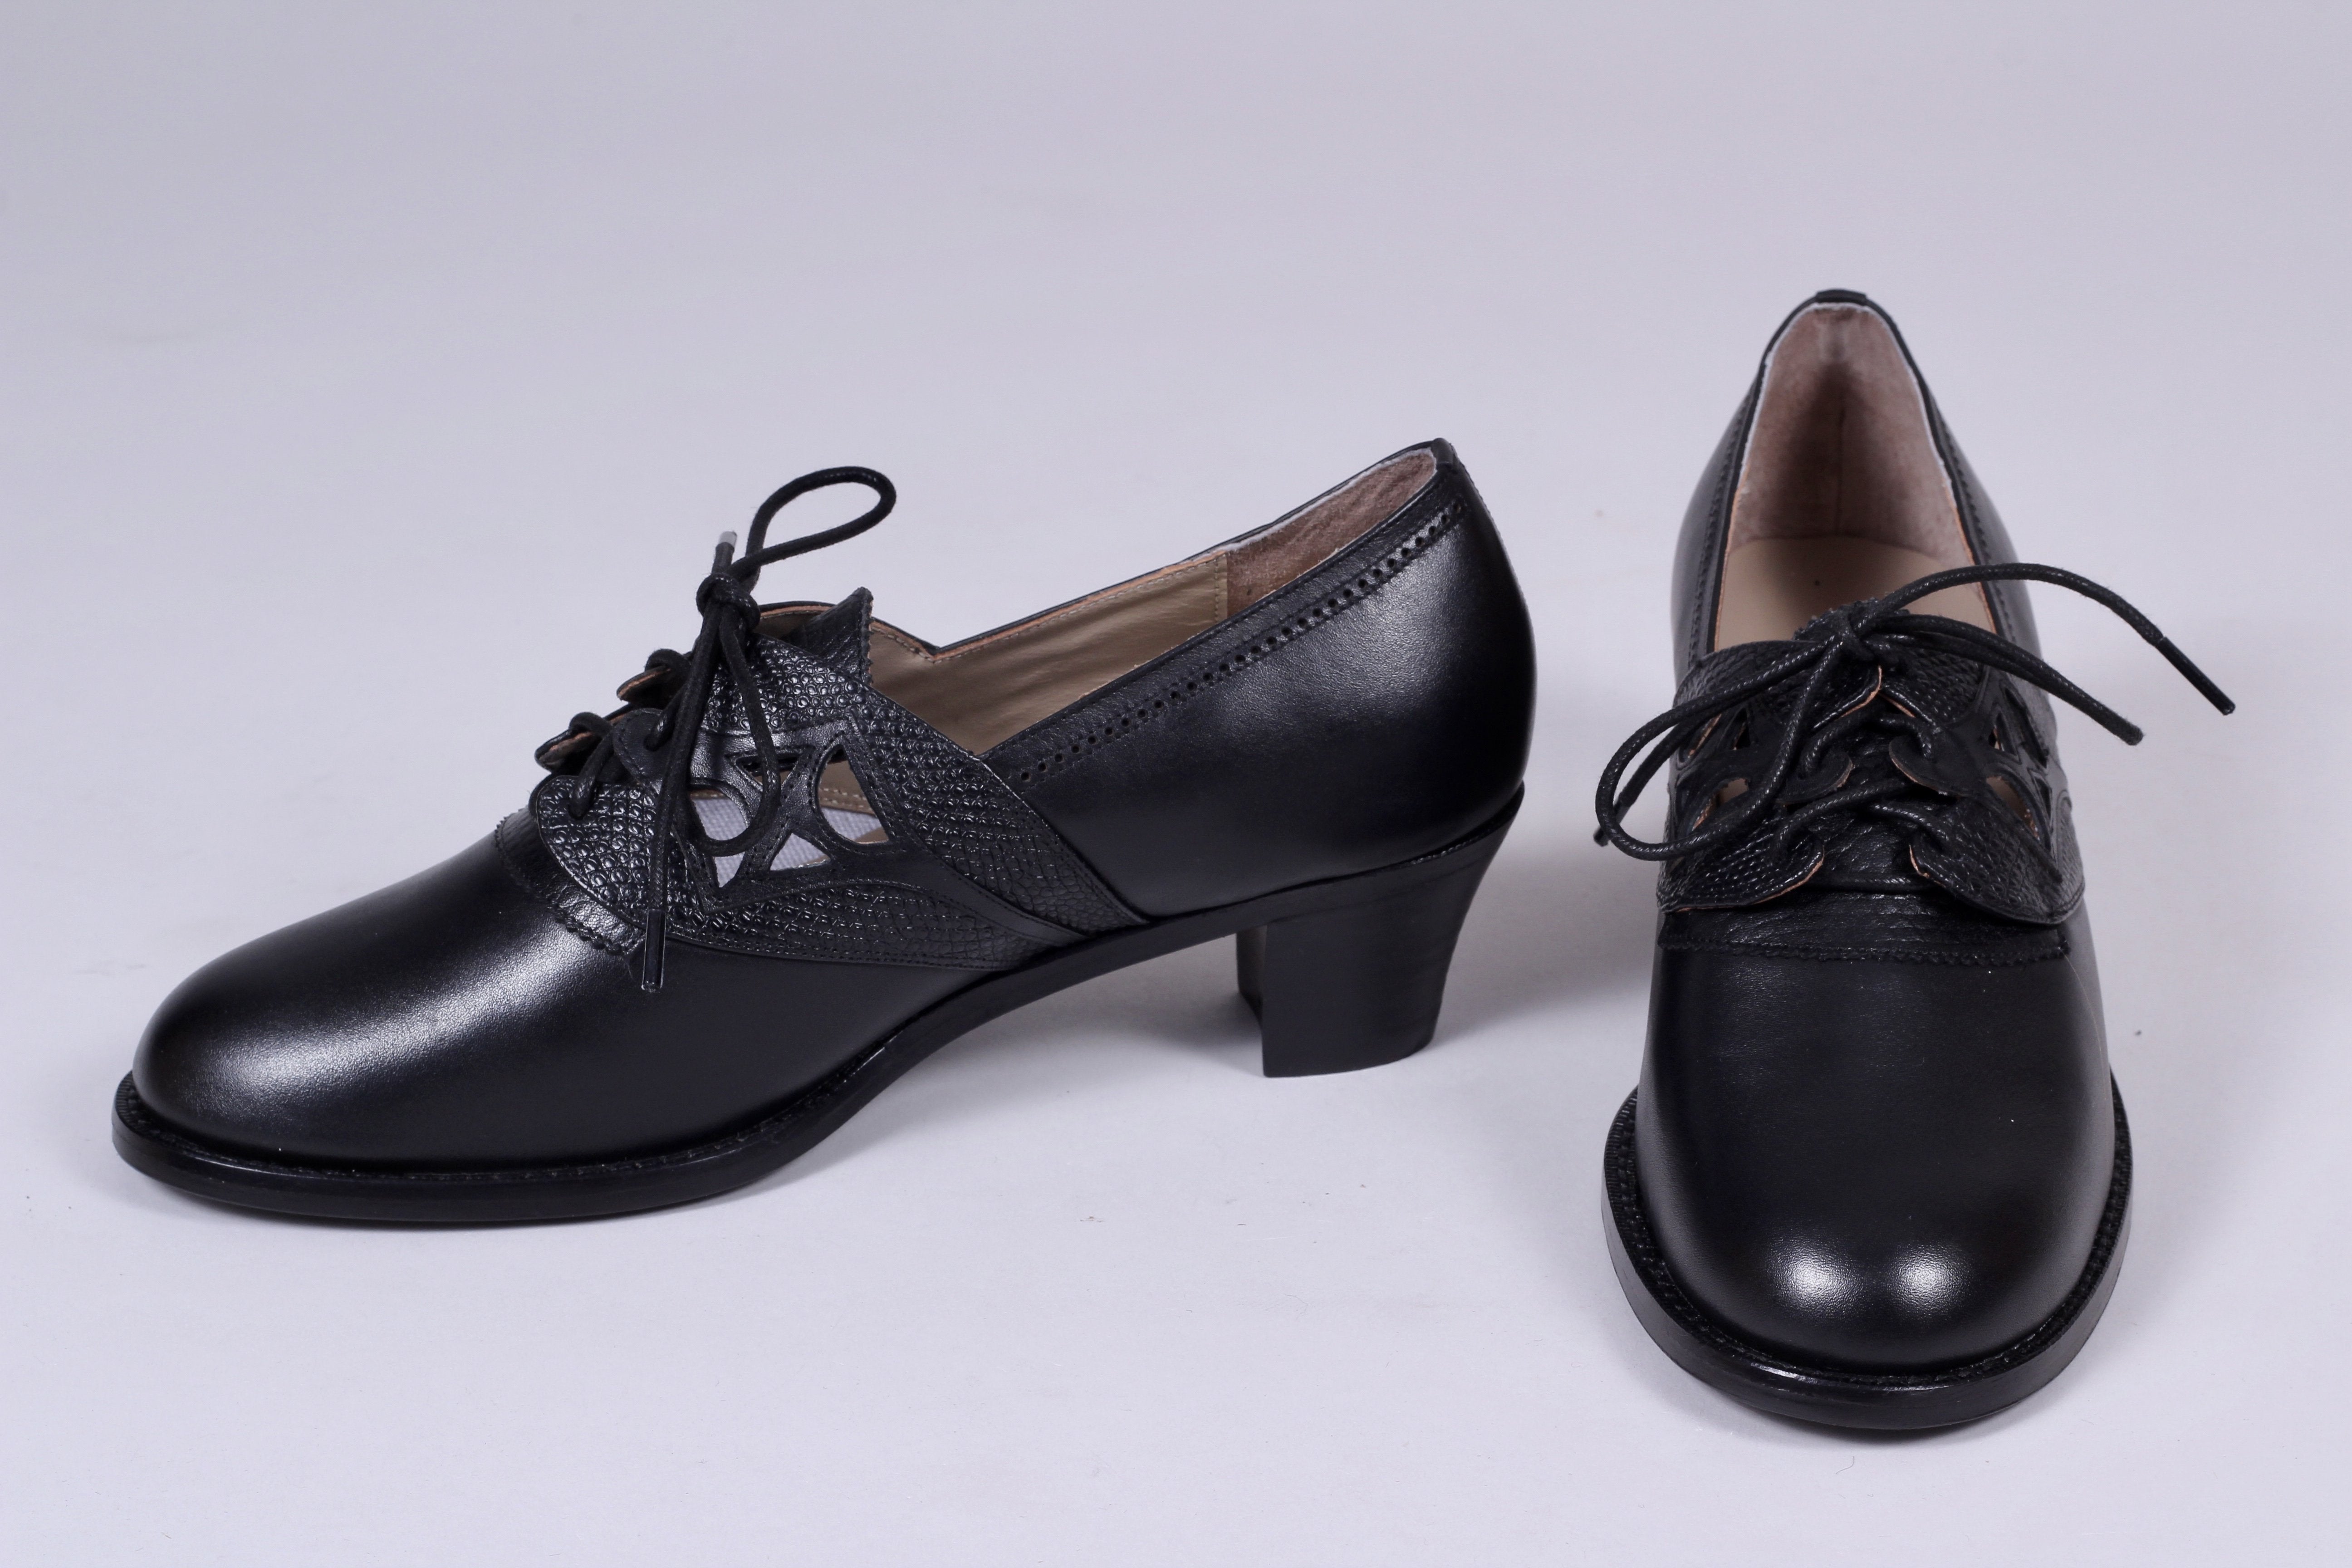 Everyday walking Oxford shoes 30s / 40s - Black - Emily – memery